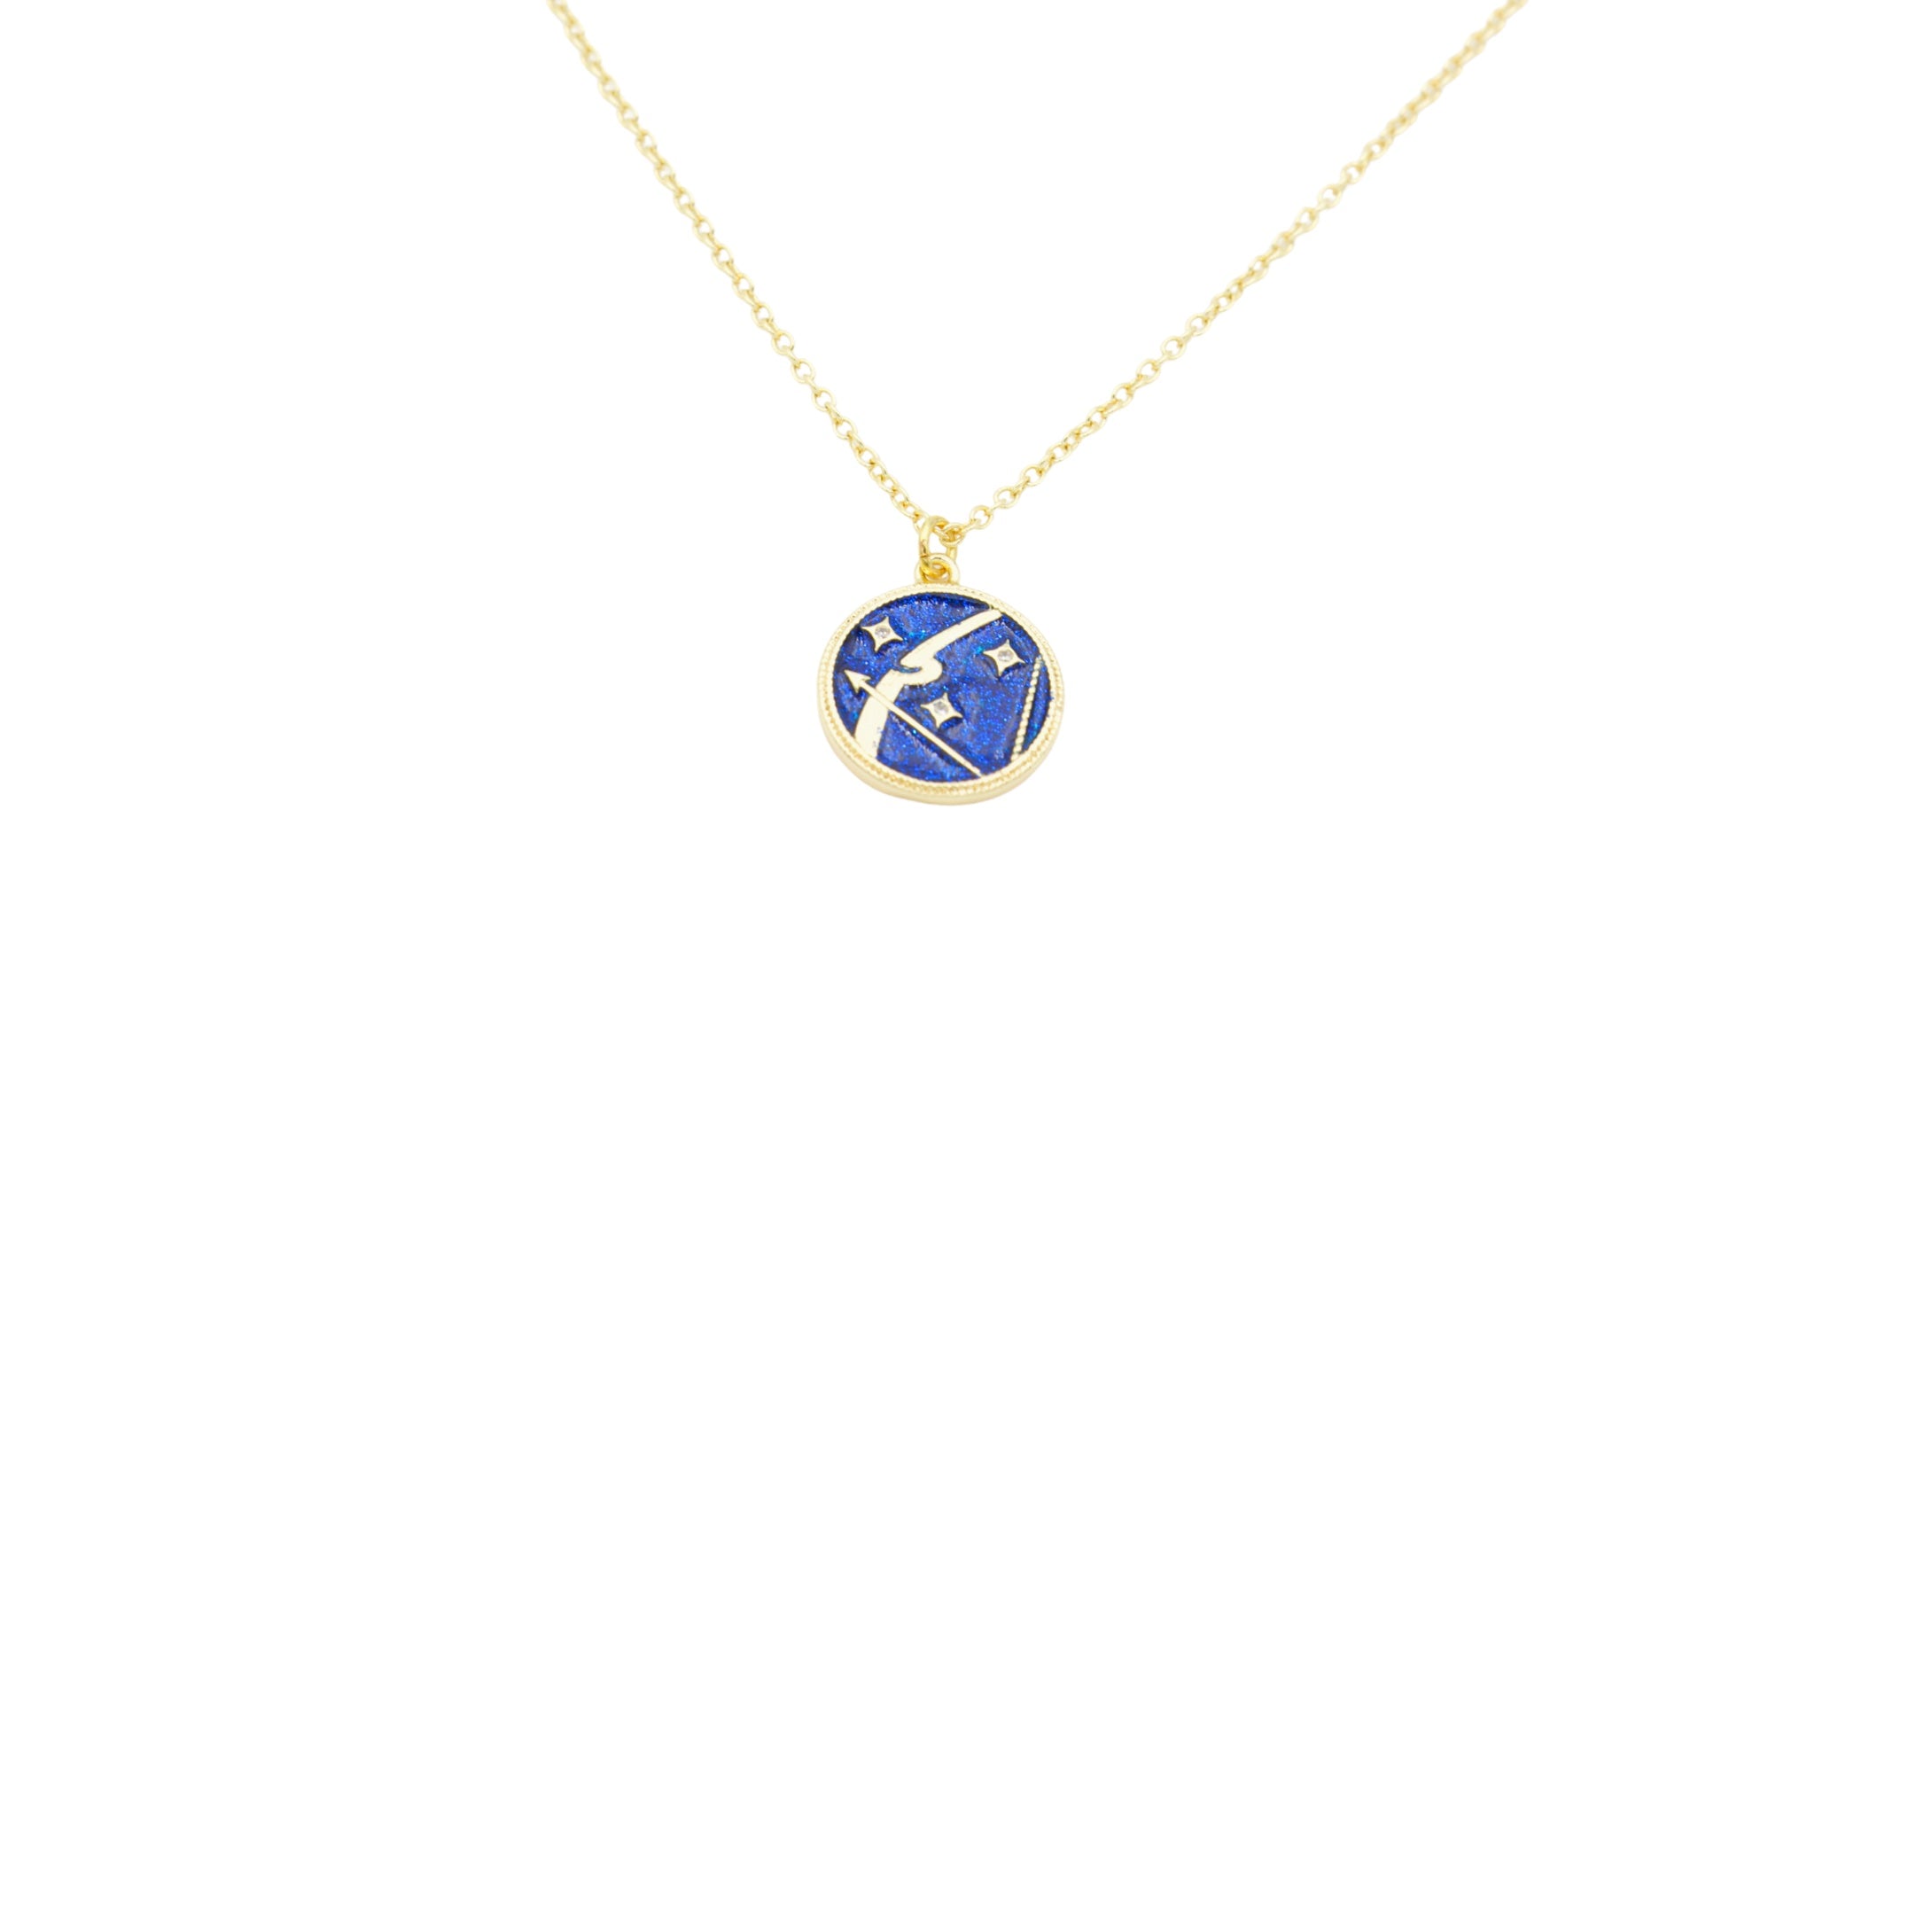 AW Boutique's Zodiac Astro Coin is a dainty pendant full of sparkle and shine.  This piece adds a pop of colour to your everyday wear and at 18 inches is a great length to mix and layer your other chains with.  Proudly wear either your own star sign or the star sign of a loved one close to your heart.  Zodiac shown is Sagittarius.